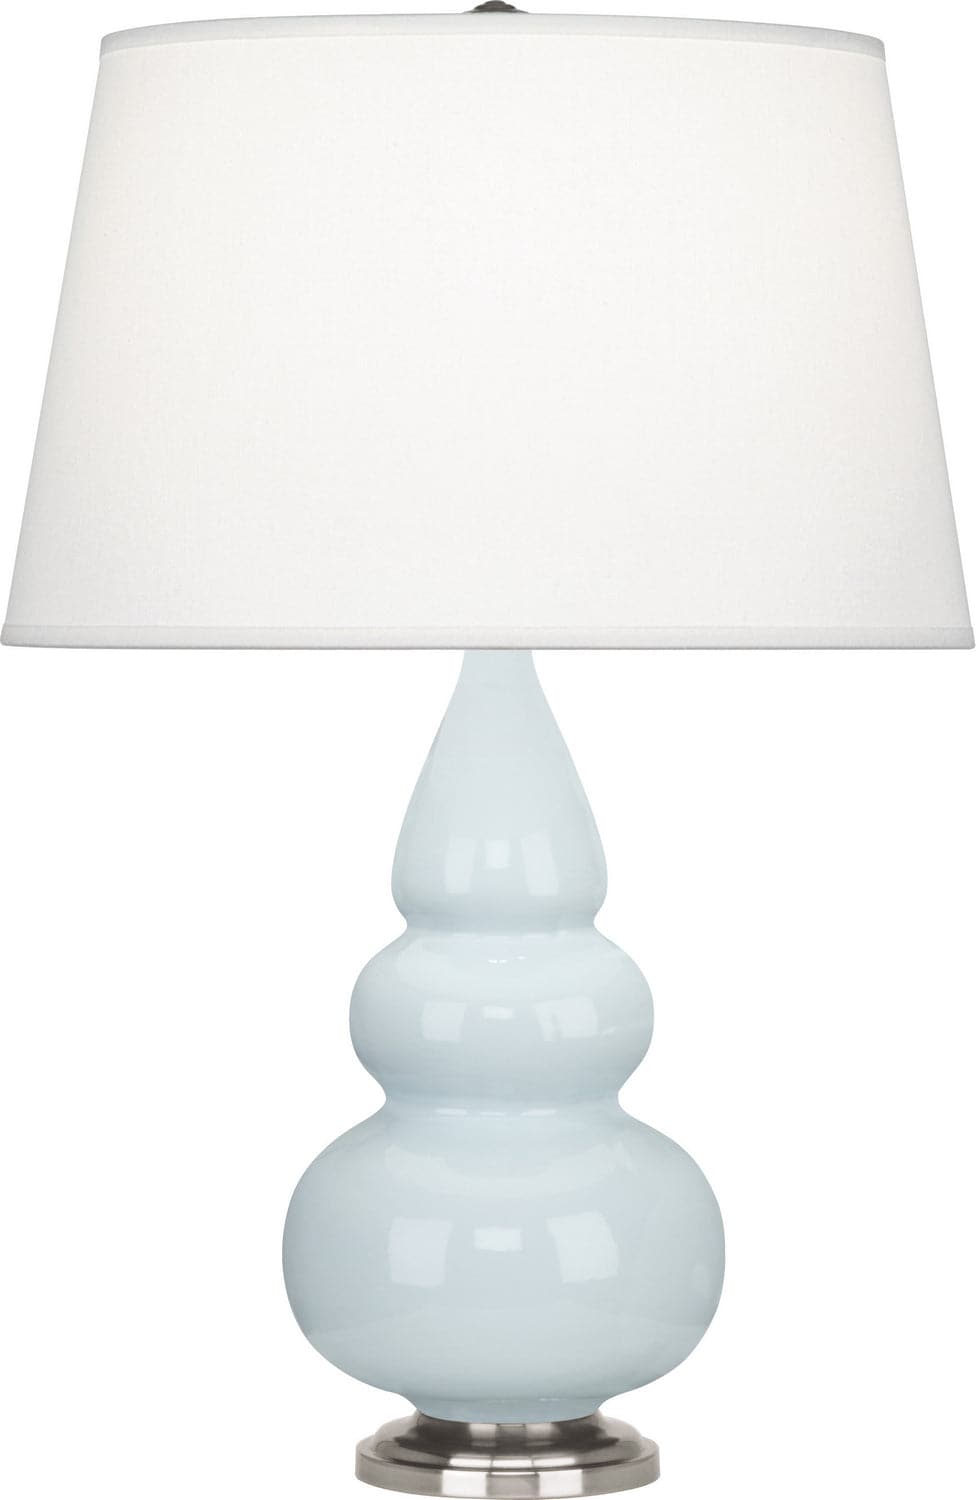 Robert Abbey - 291X - One Light Accent Lamp - Small Triple Gourd - Baby Blue Glazed w/Antique Silver